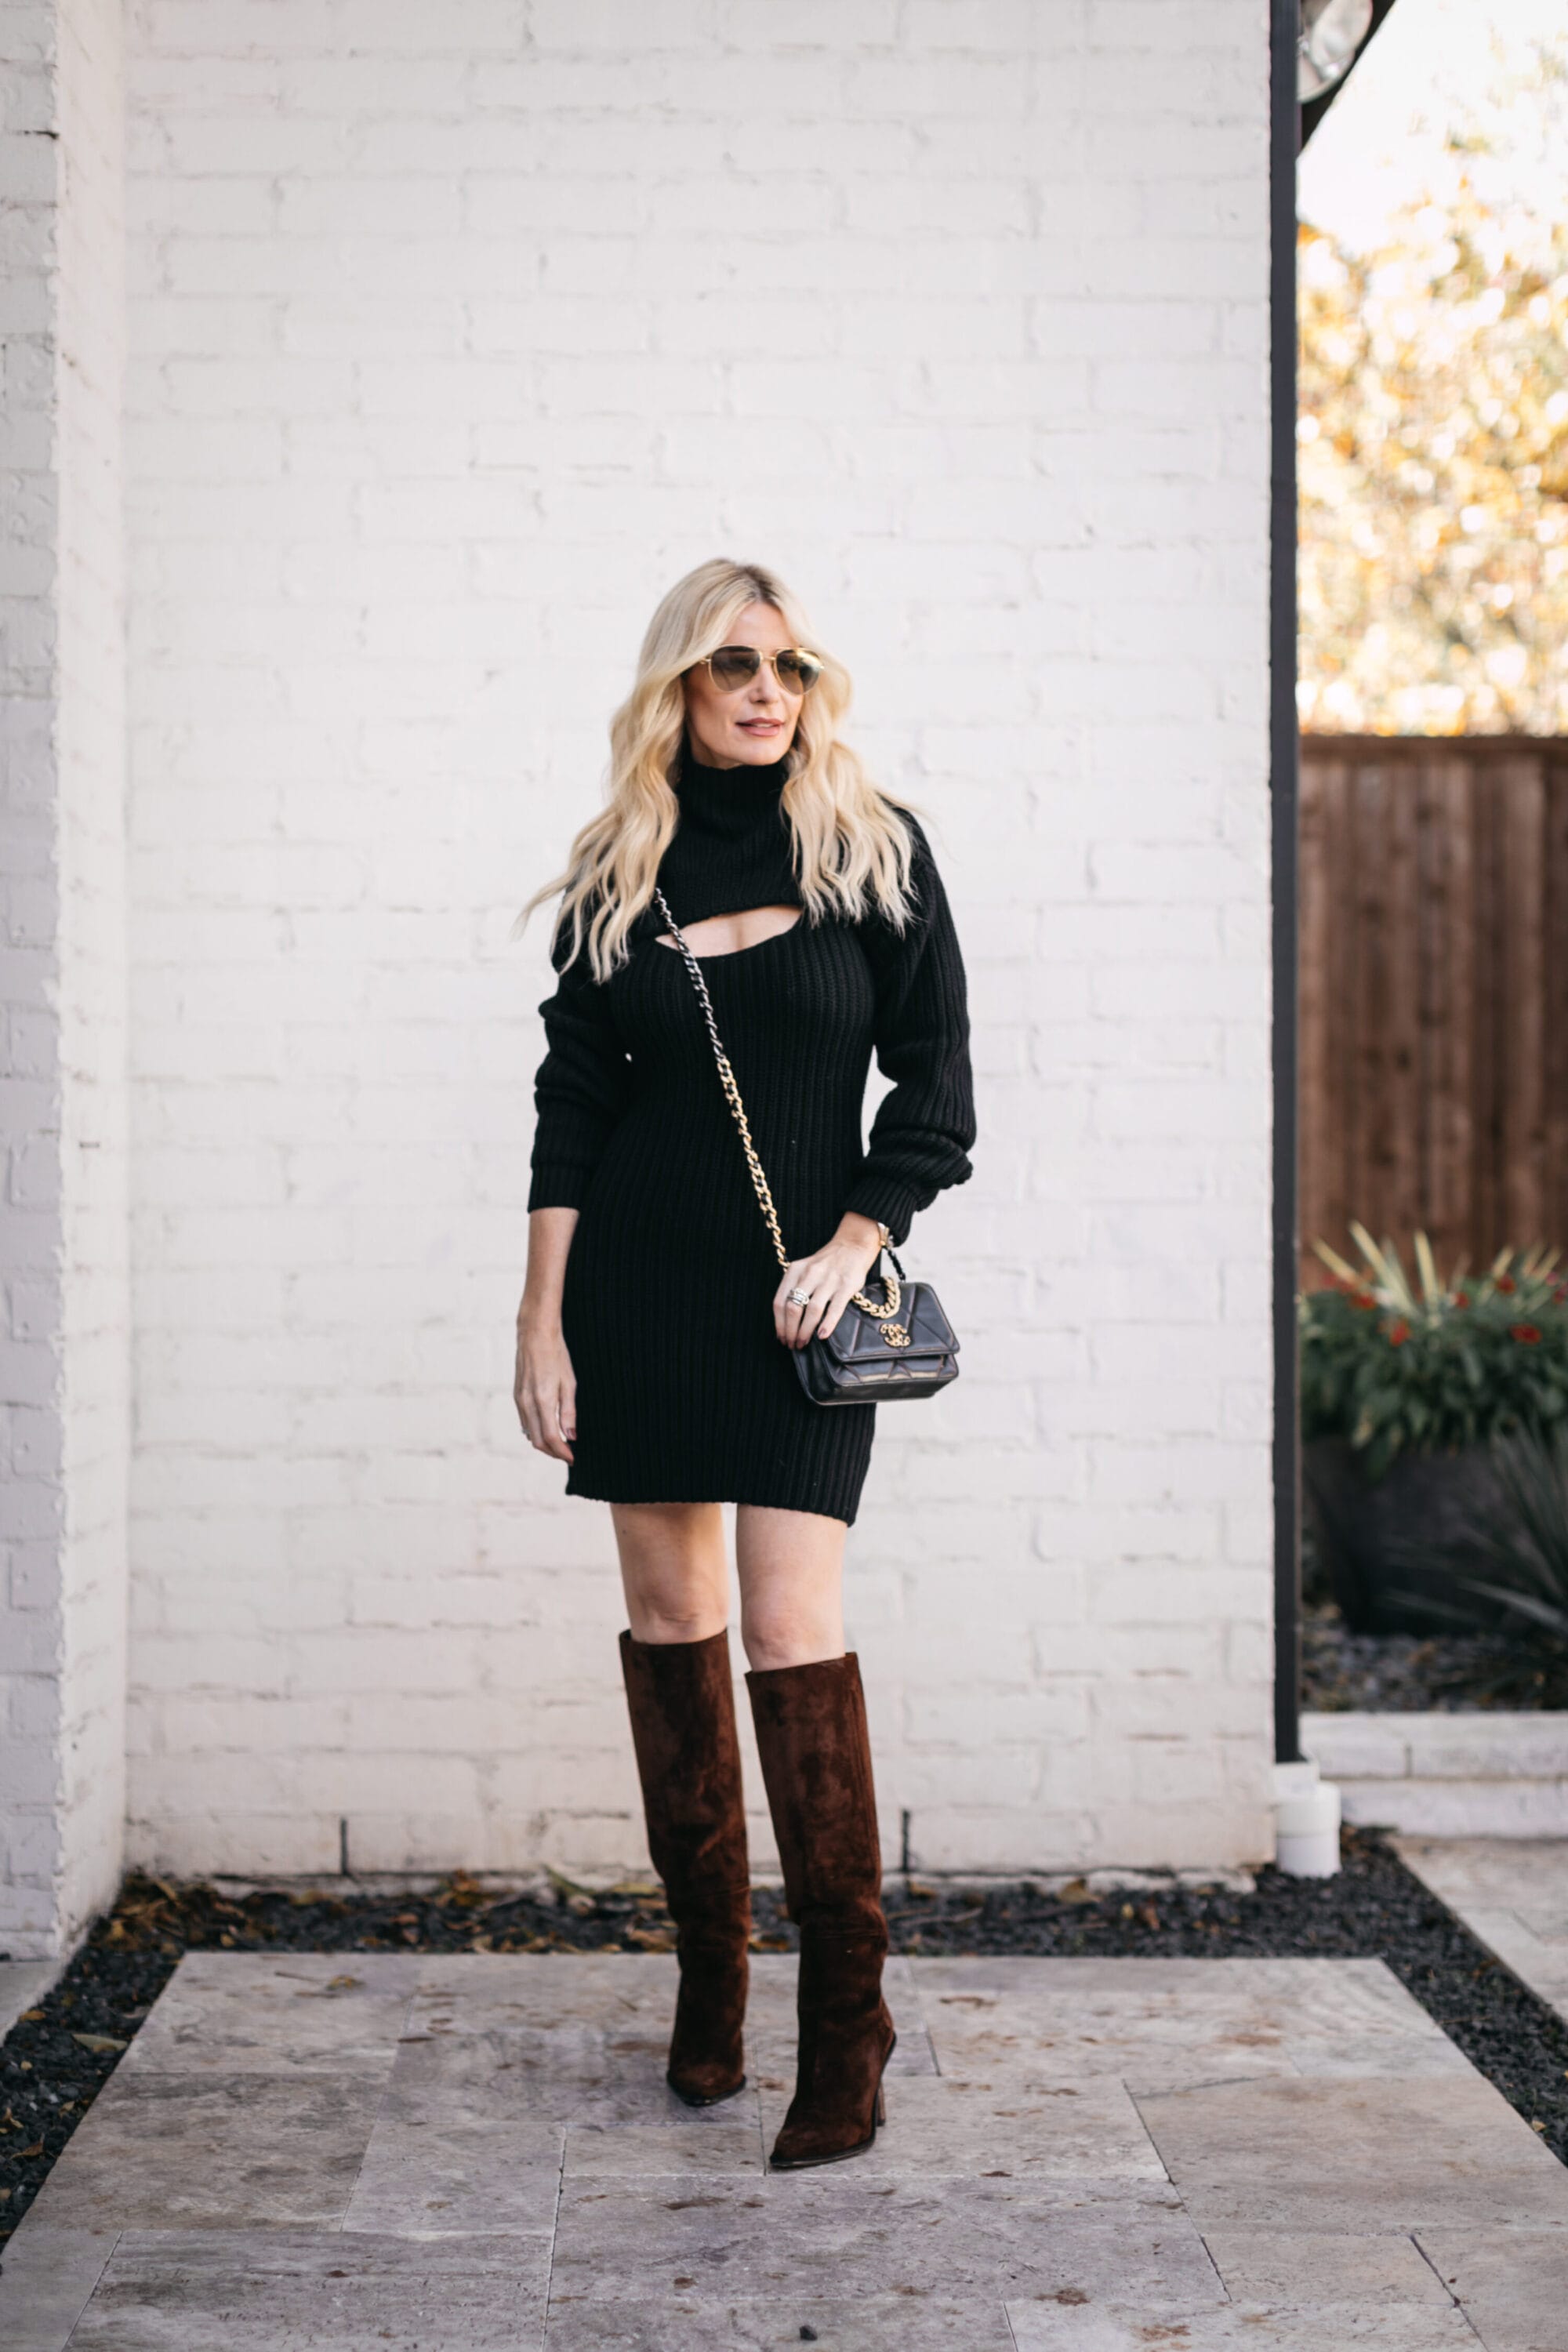 Dallas fashion blogger wearing a black sweater dress and brown knee high boots